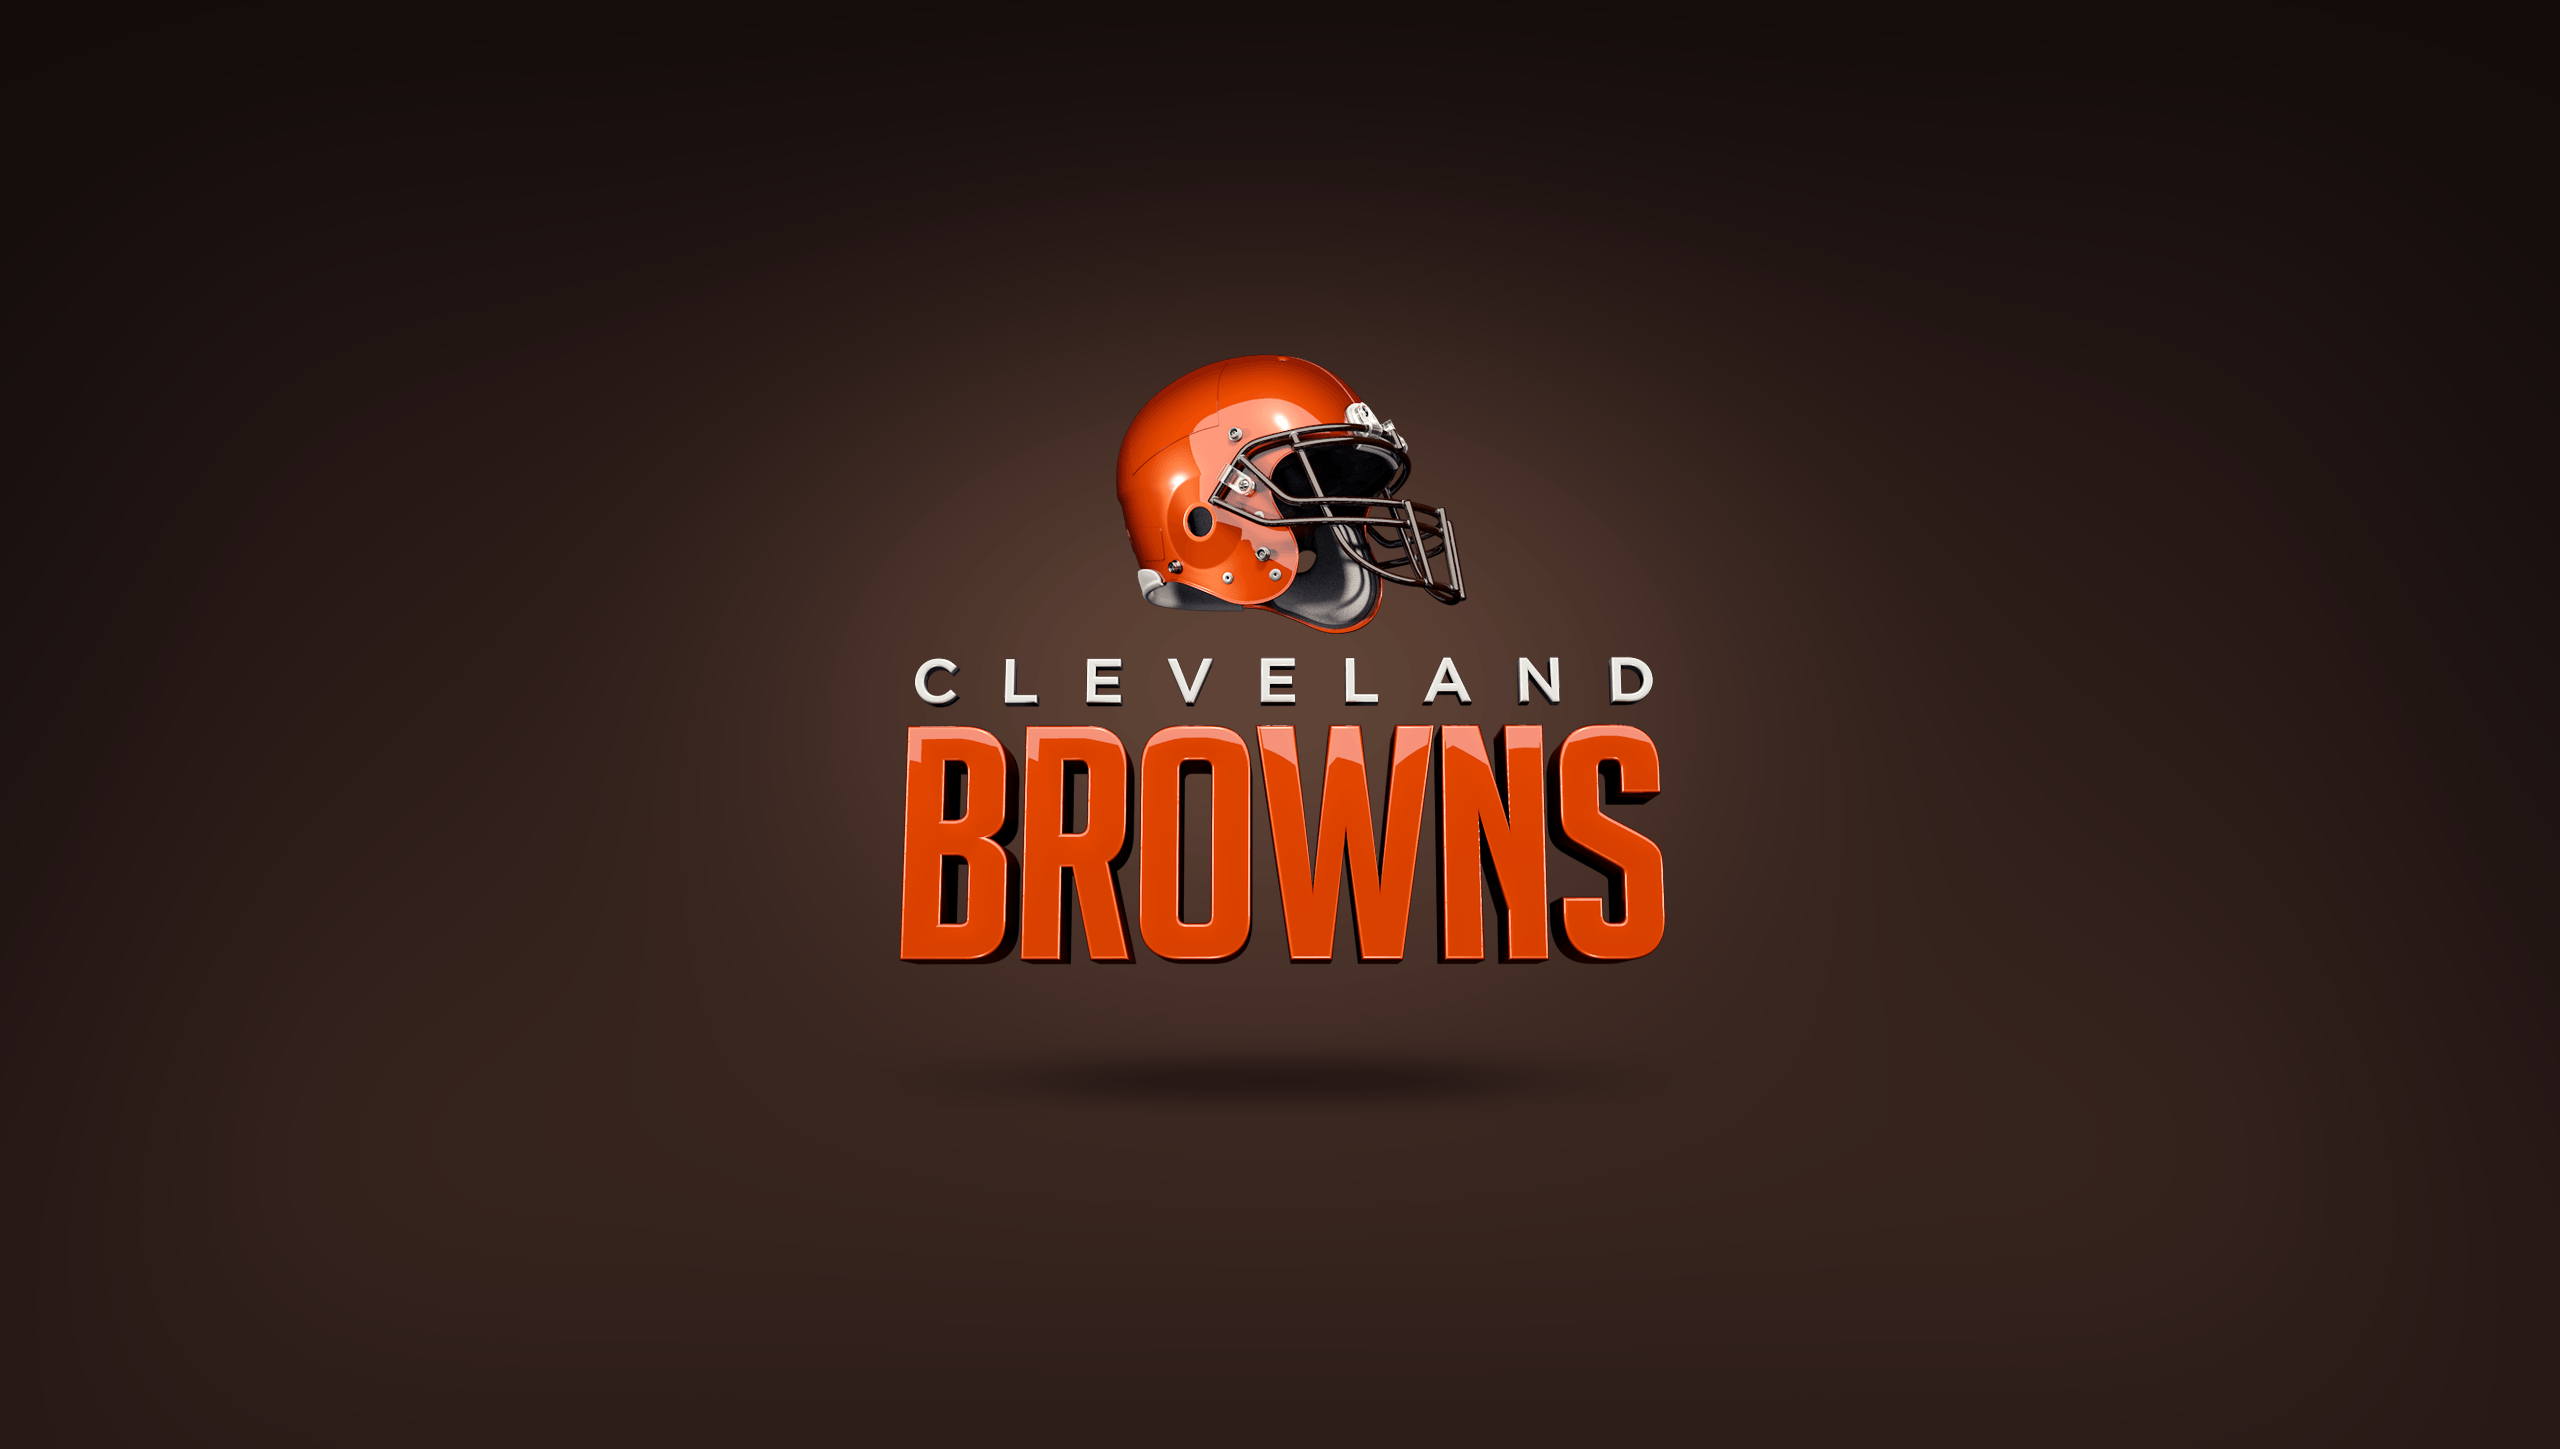 Cleveland Browns Schedule 2016 Wallpapers - Wallpaper Cave